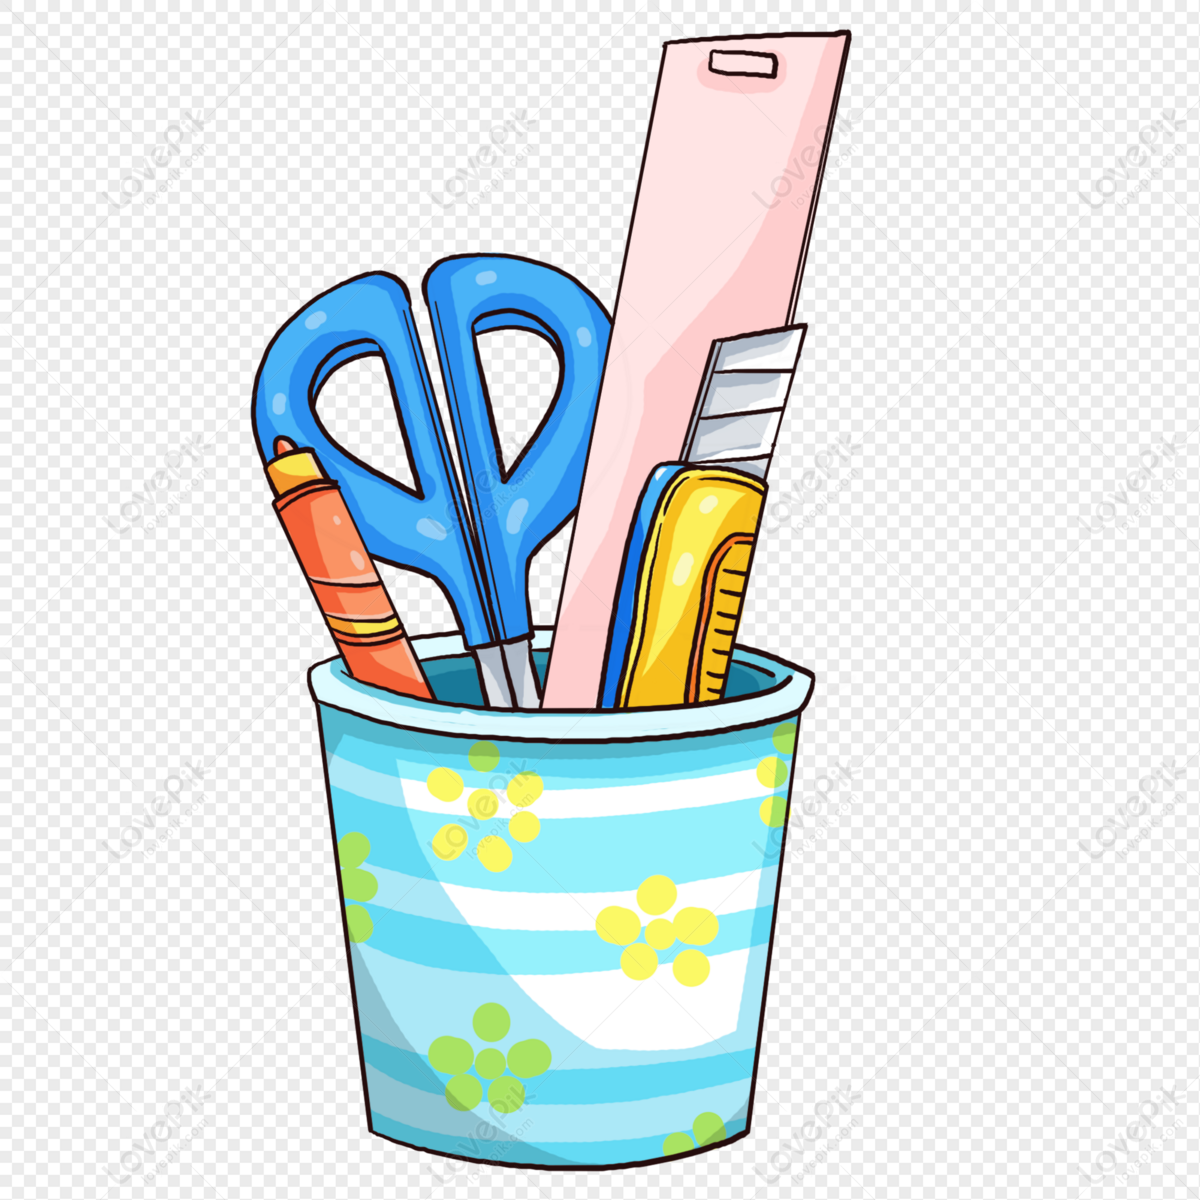 View full size Craft Art Supplies Png Clipart and download transparent  clipart for free! Like it and pin it.